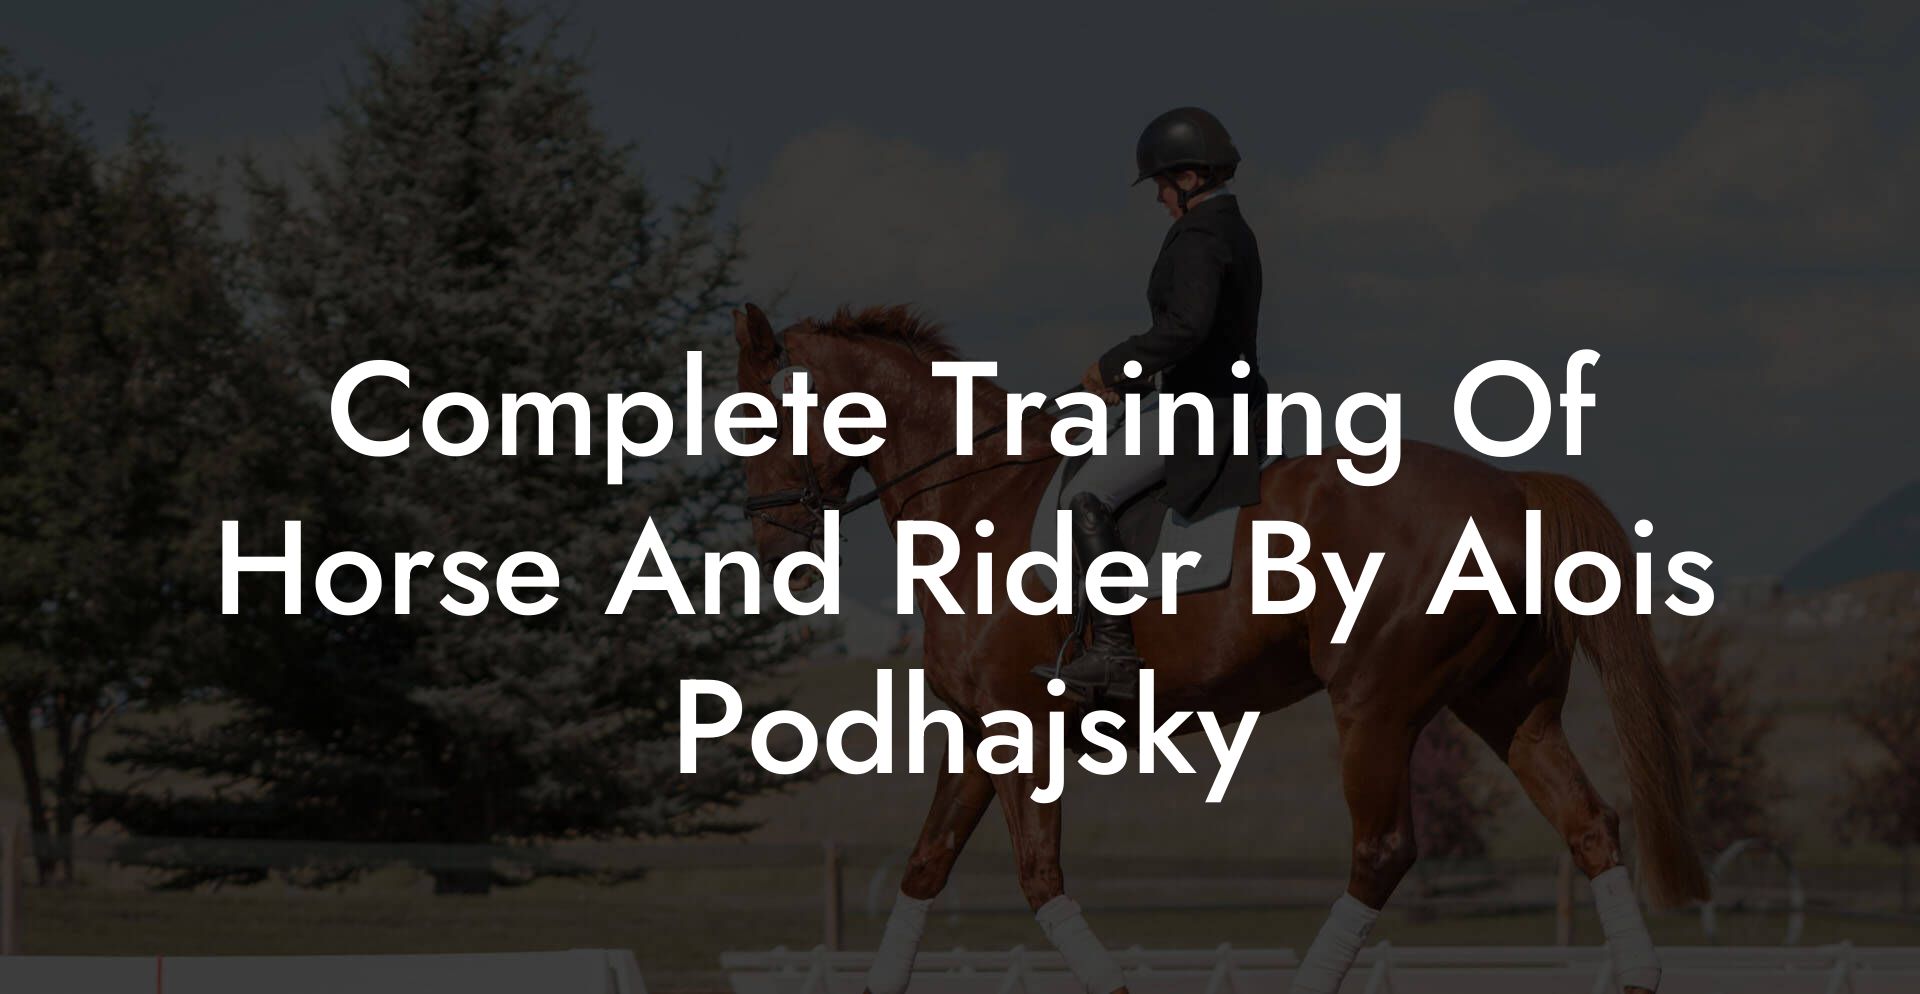 Complete Training Of Horse And Rider By Alois Podhajsky